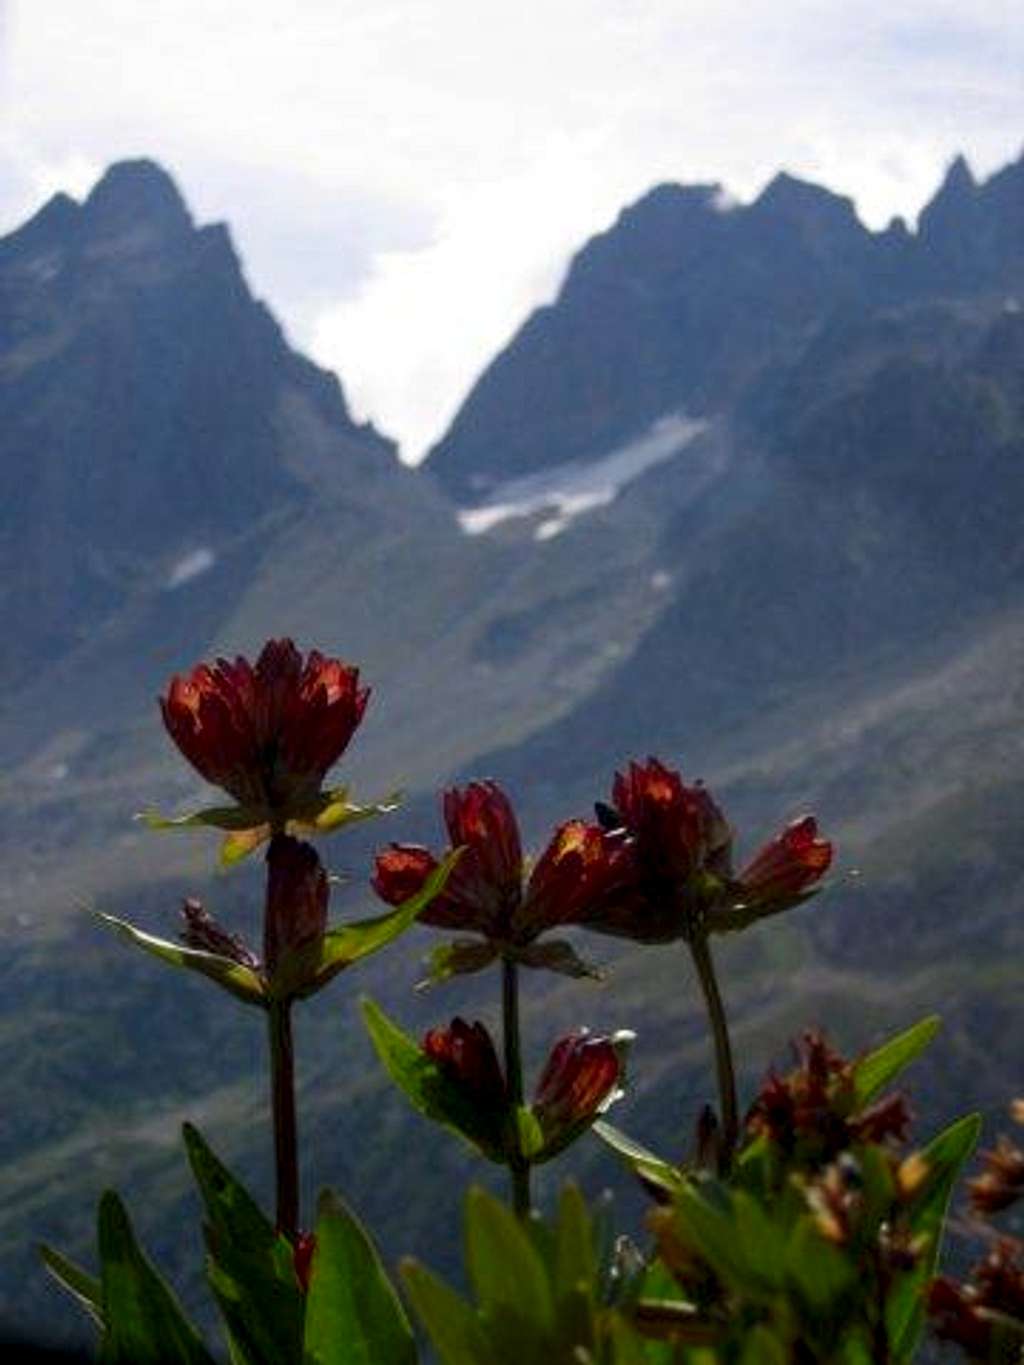 Flowers and mountains, next...